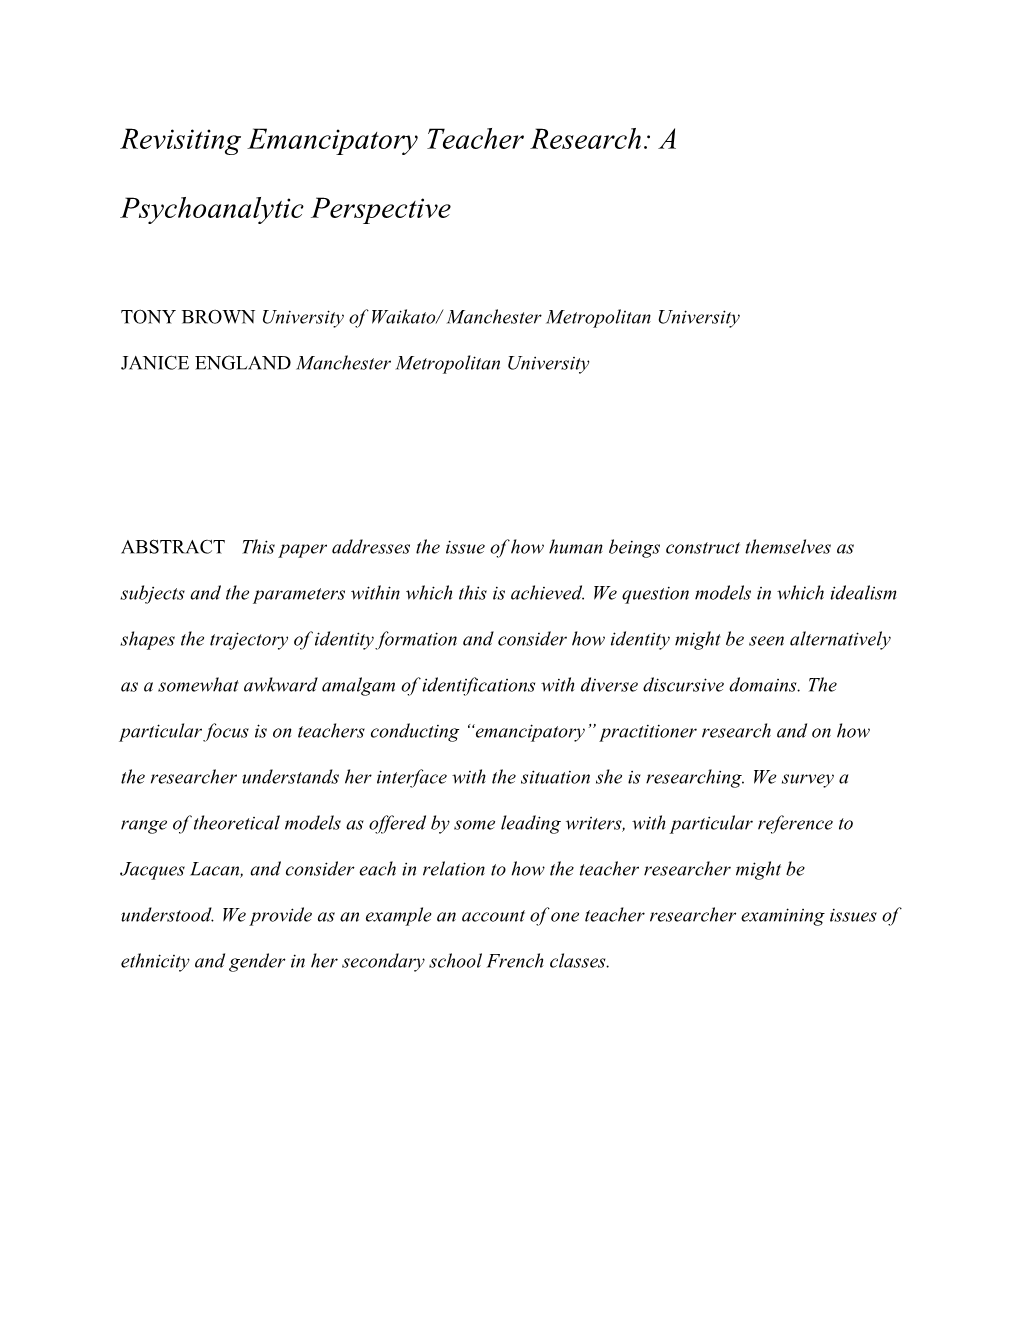 Revisiting Emancipatory Teacher Research: a Psychoanalytic Perspective